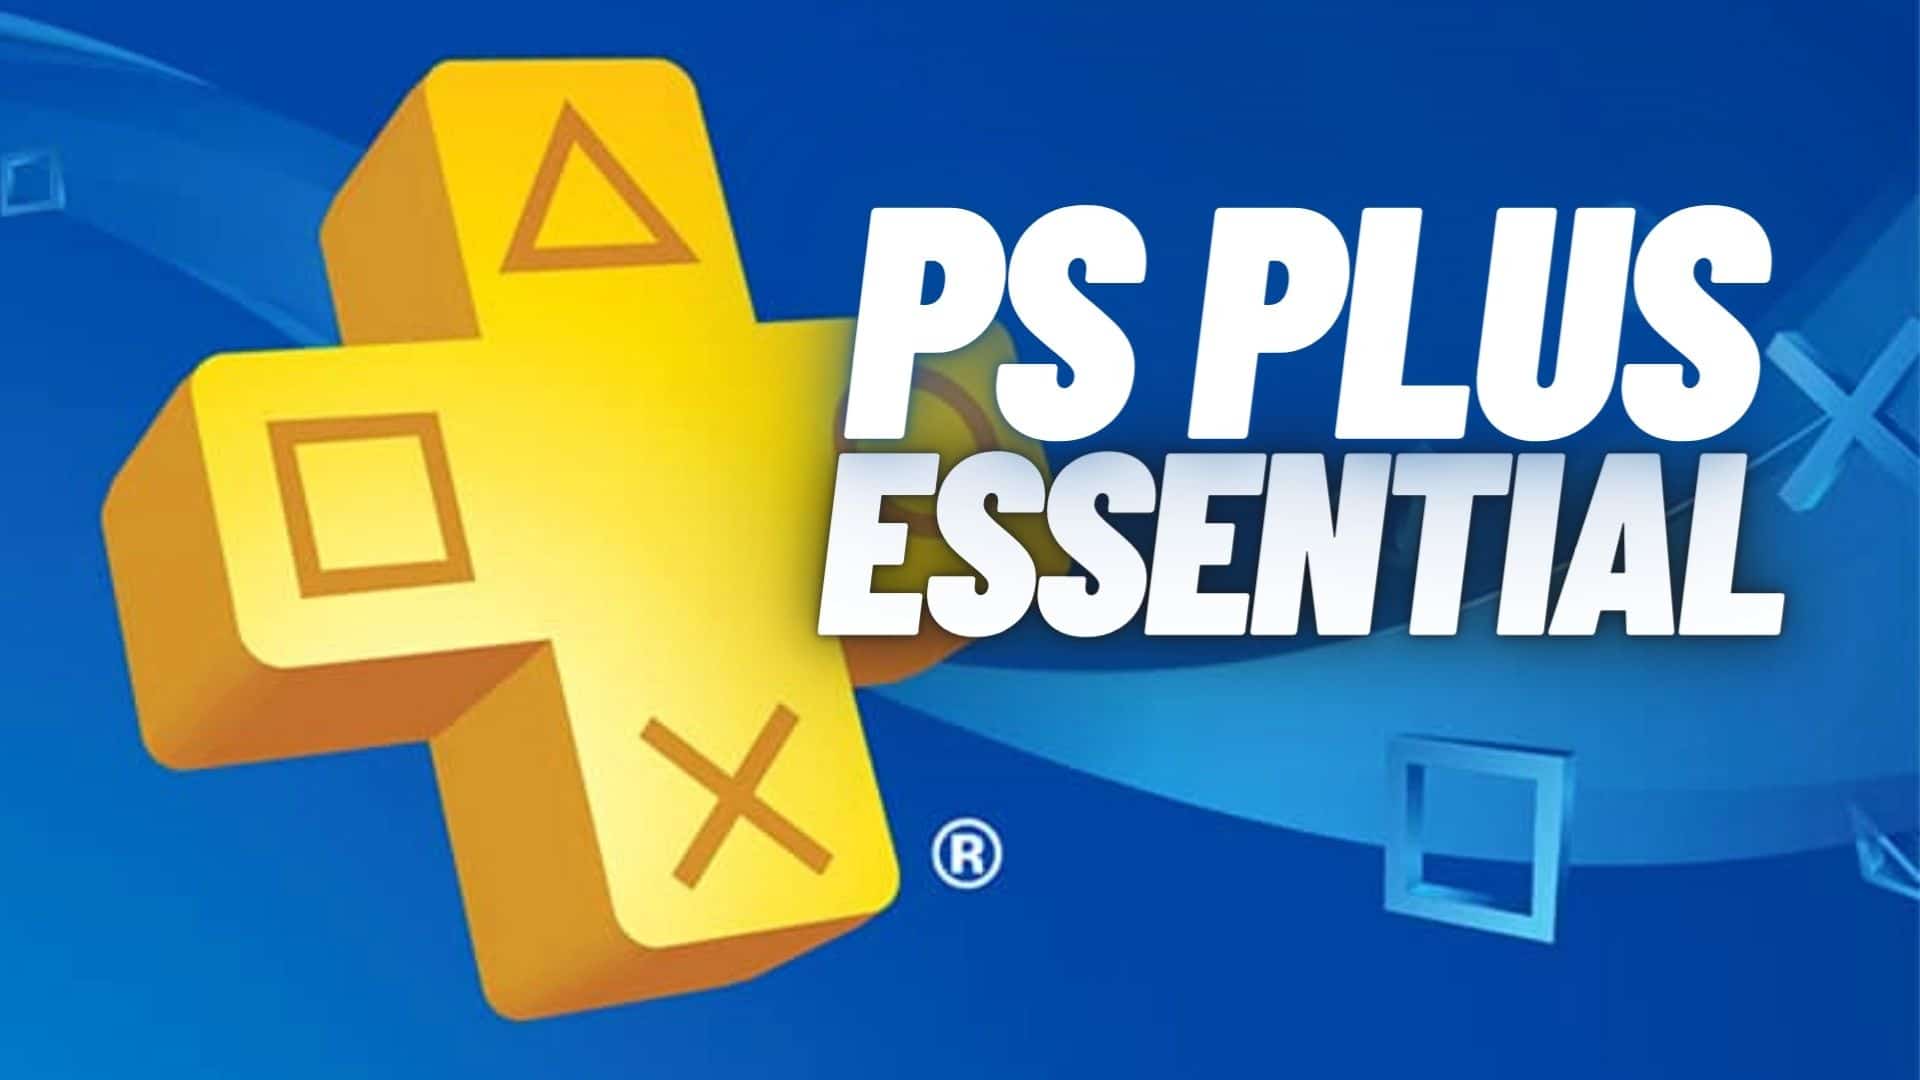 PS Plus Essential: All information about the new standard subscription on PS4 & PS5 – release, games, price